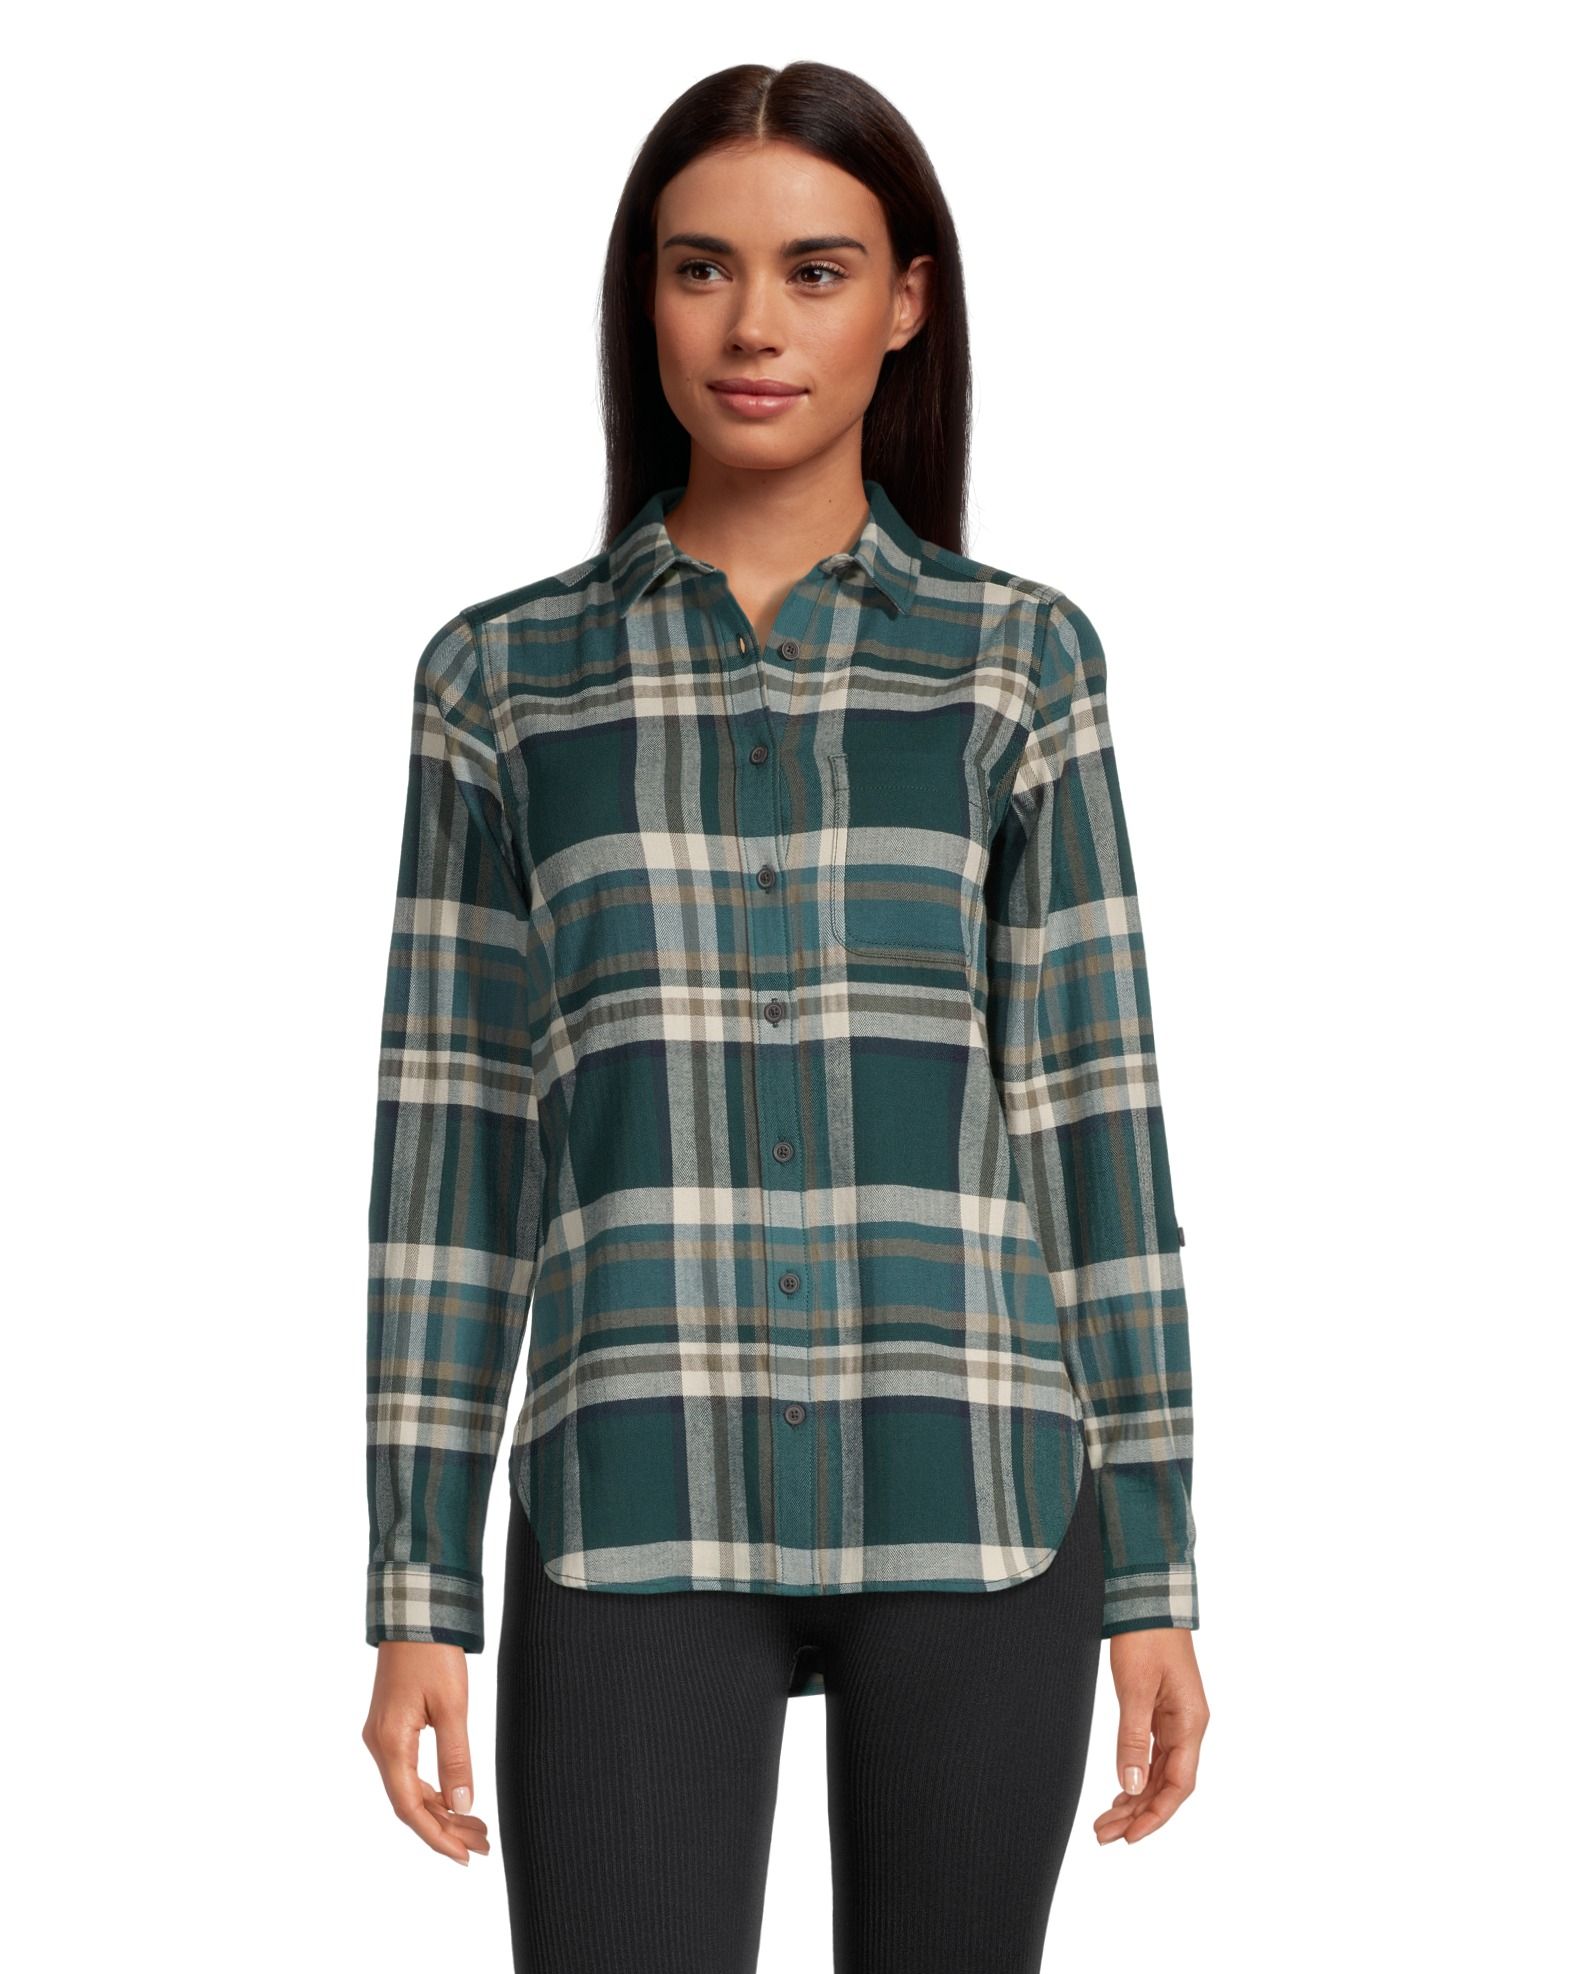 What's the Difference Between Plaid and Flannel?